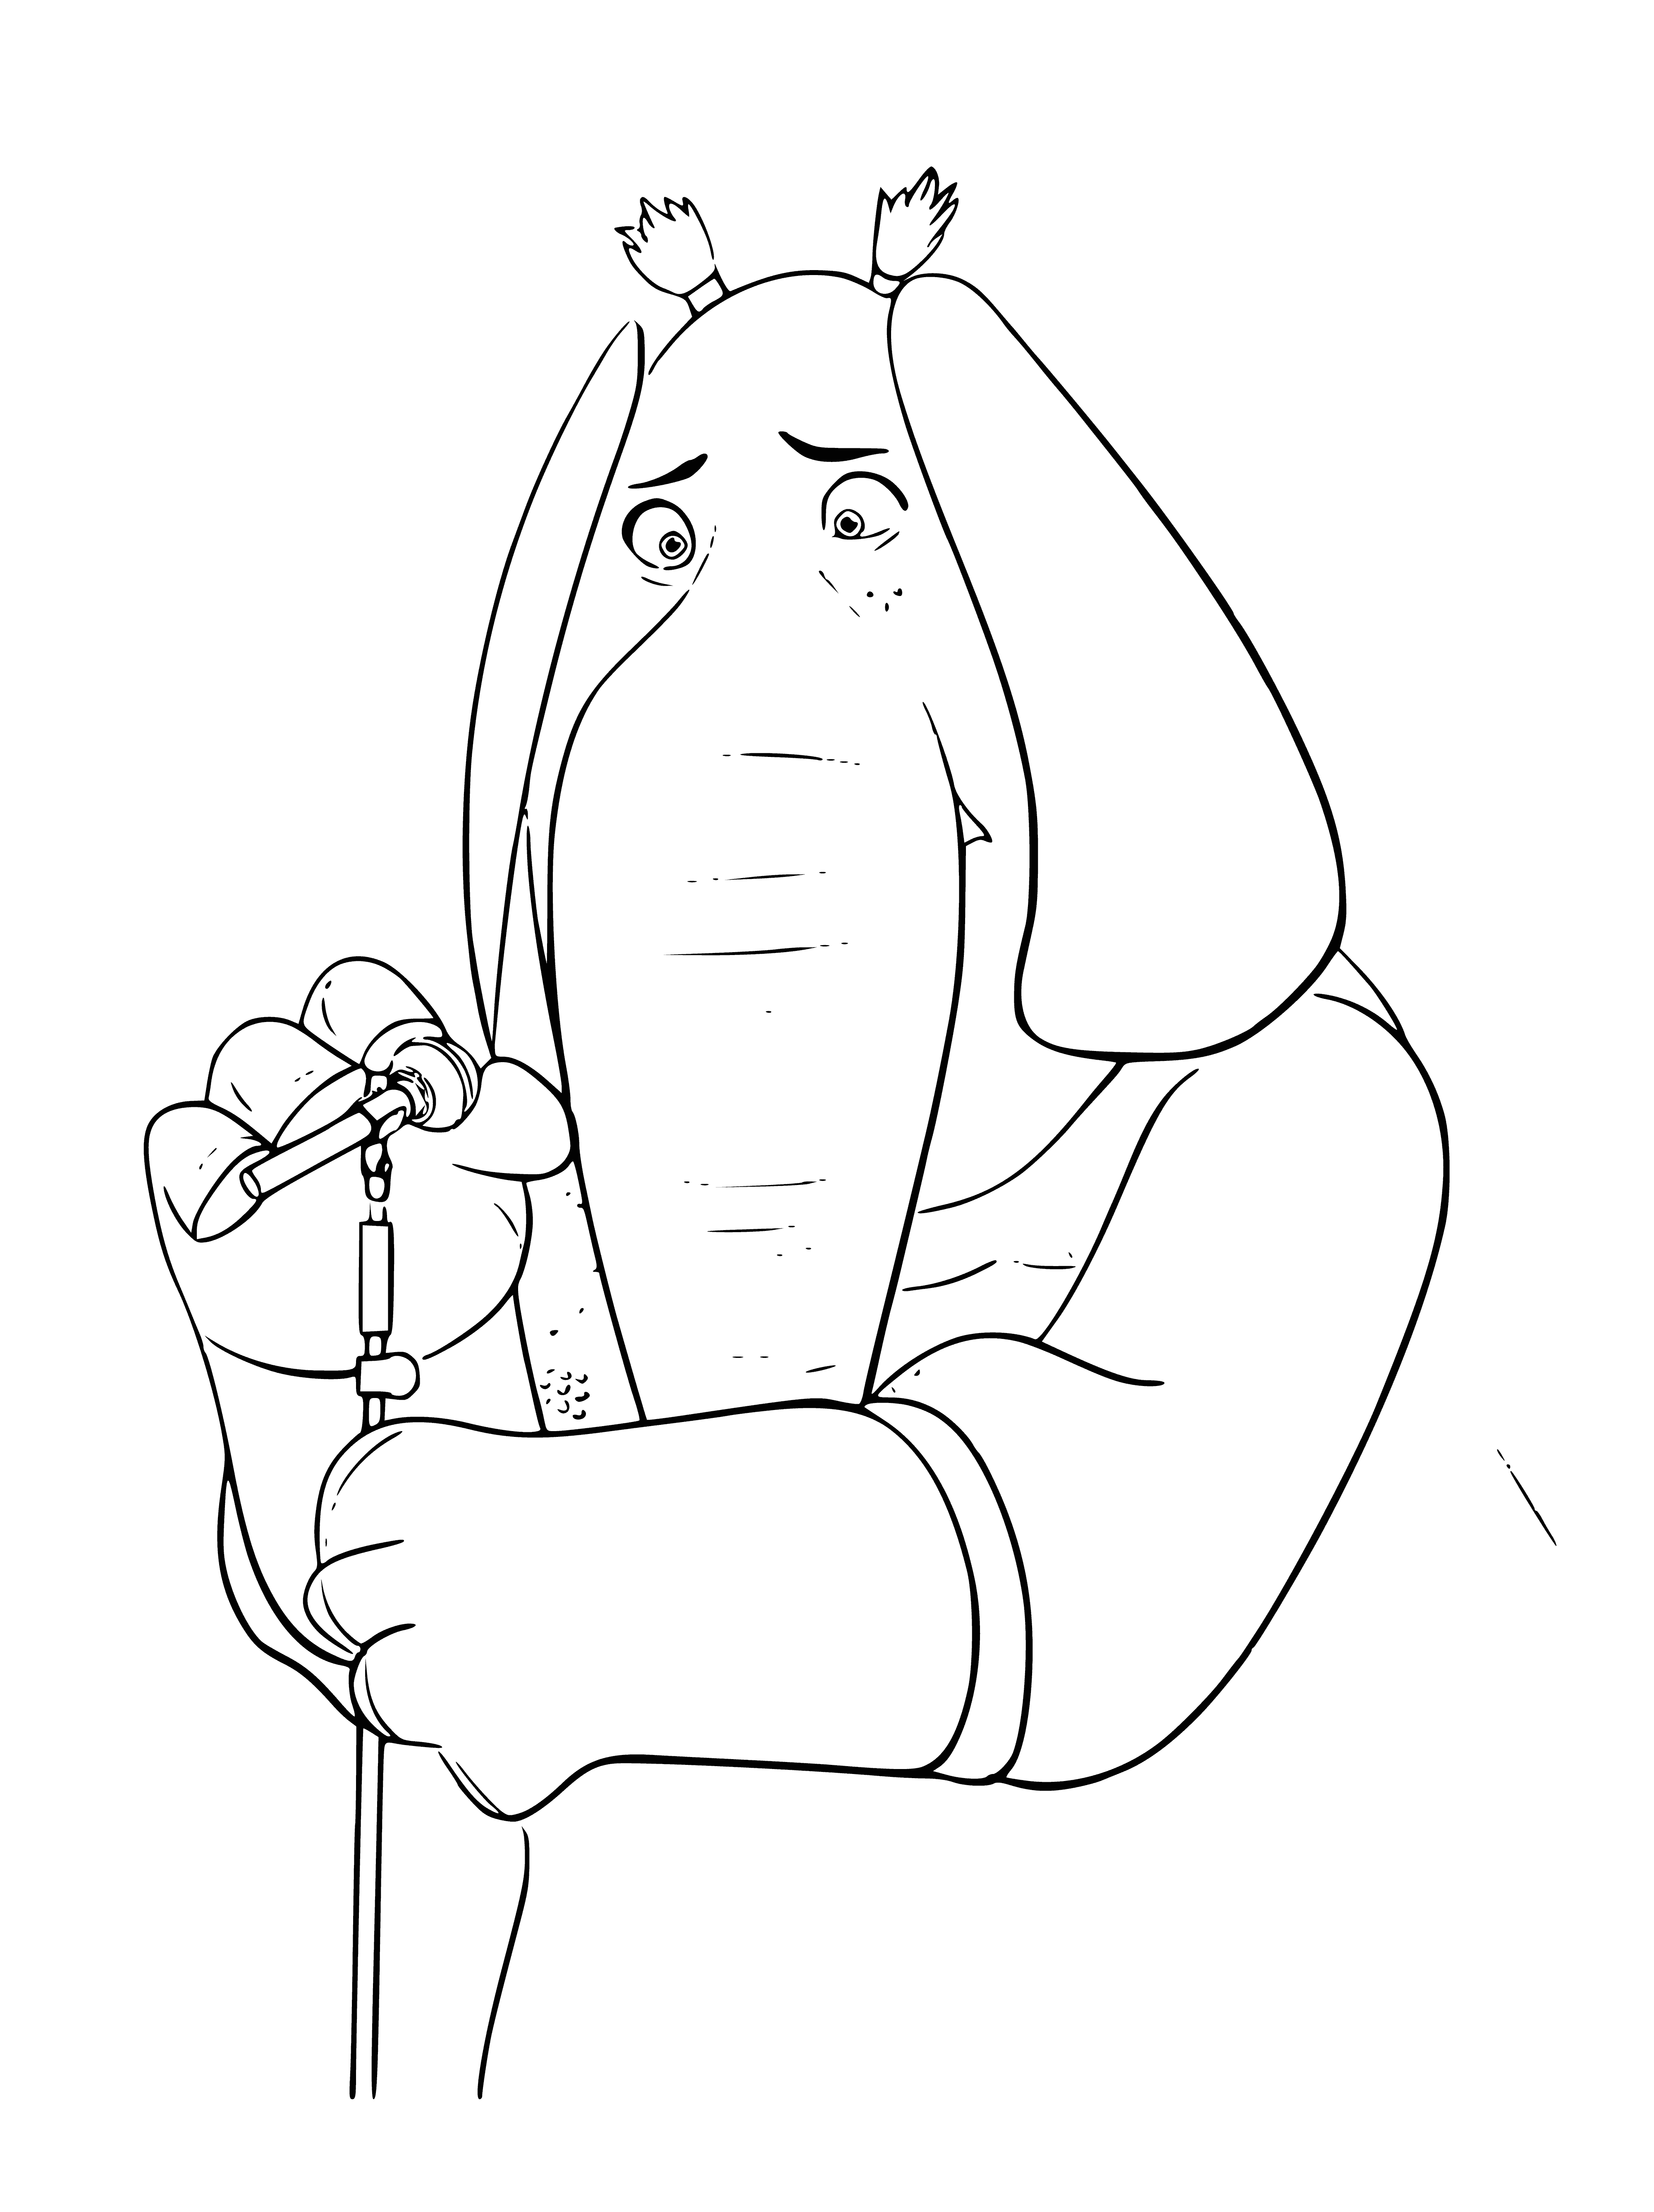 coloring page: Woman dressed in blue holds an elephant's trunk while it stands on hind legs, front legs in air. Red flower in her hair.